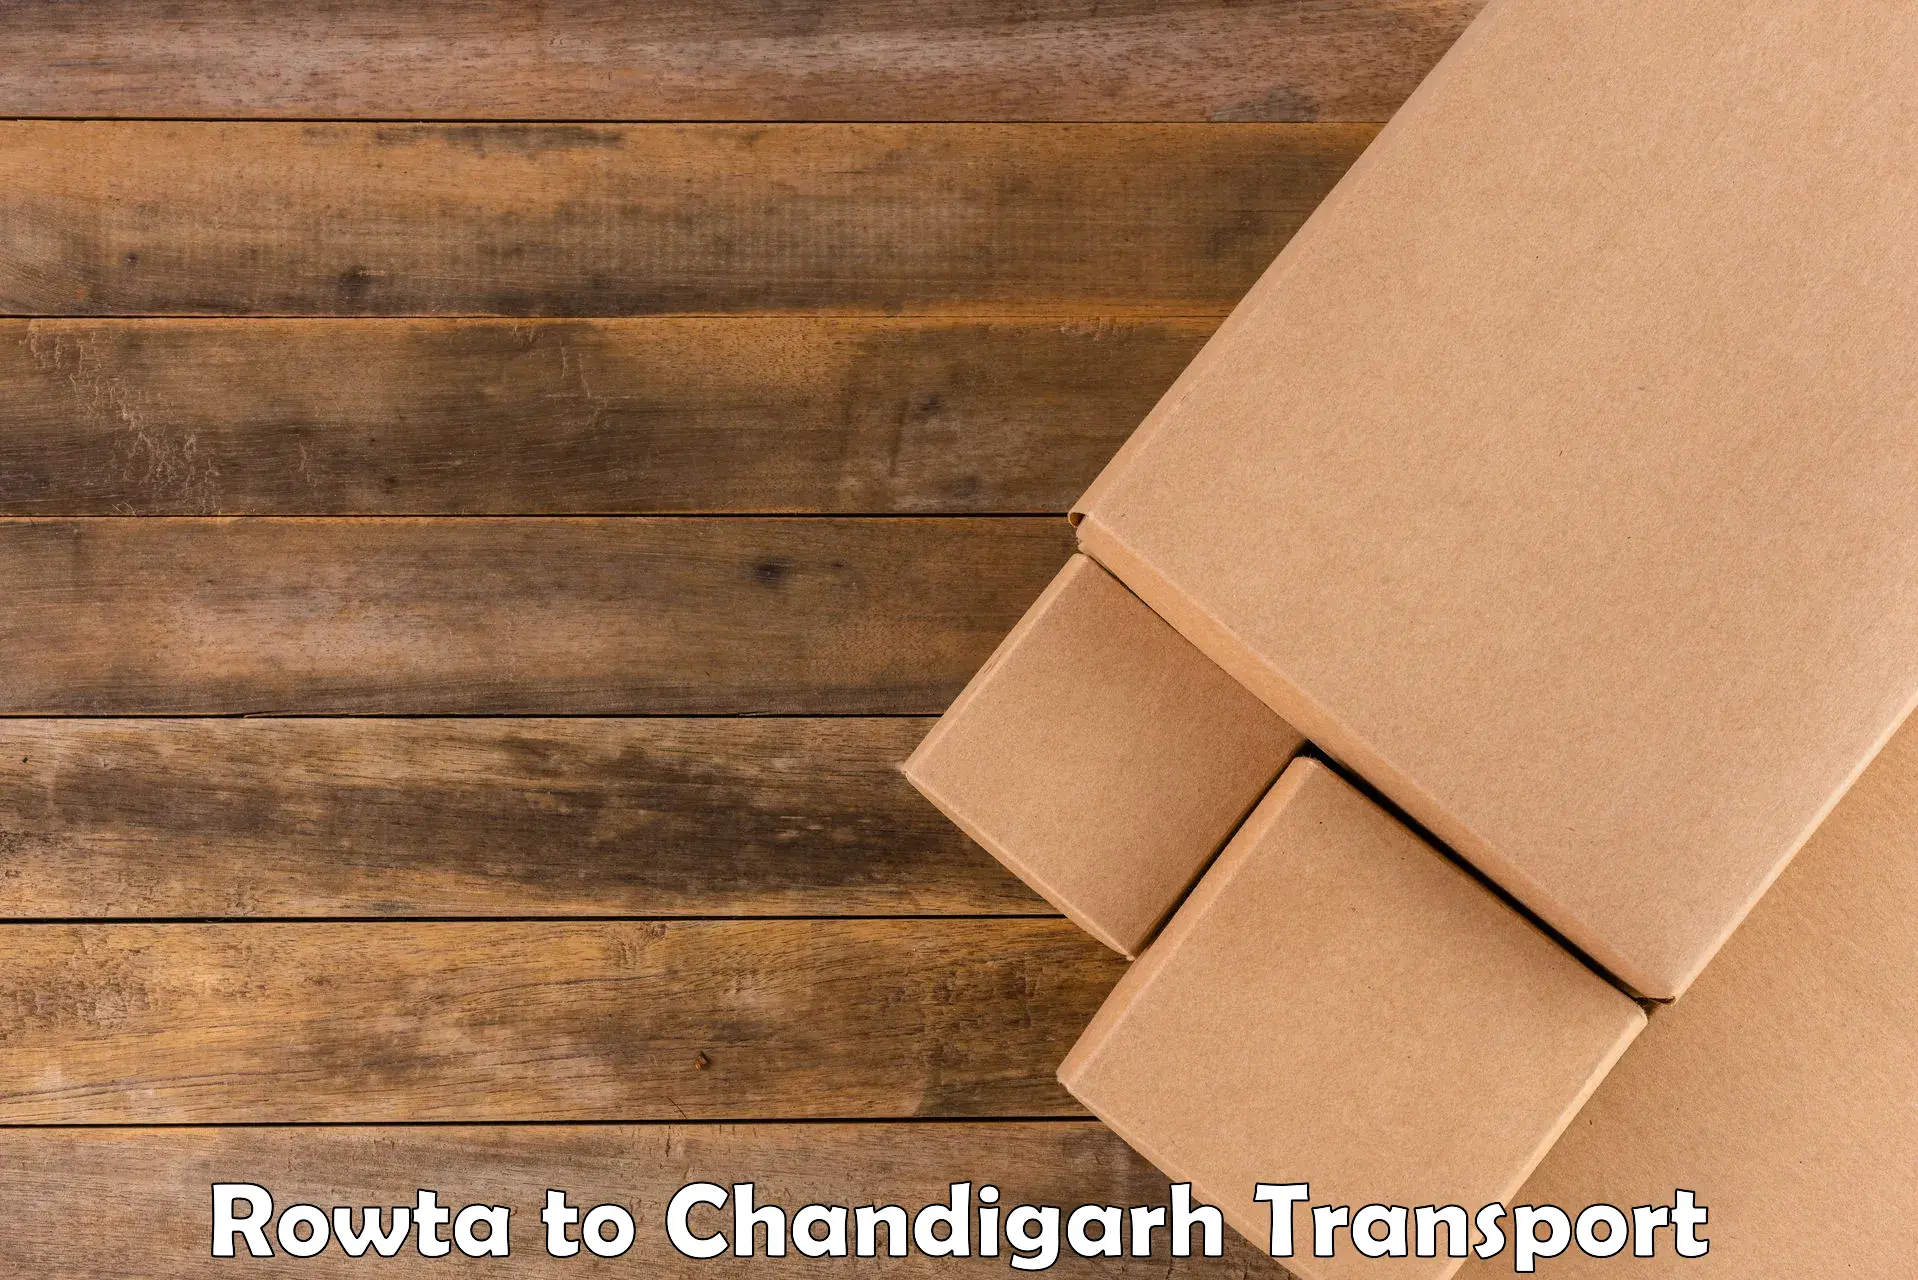 Delivery service Rowta to Chandigarh